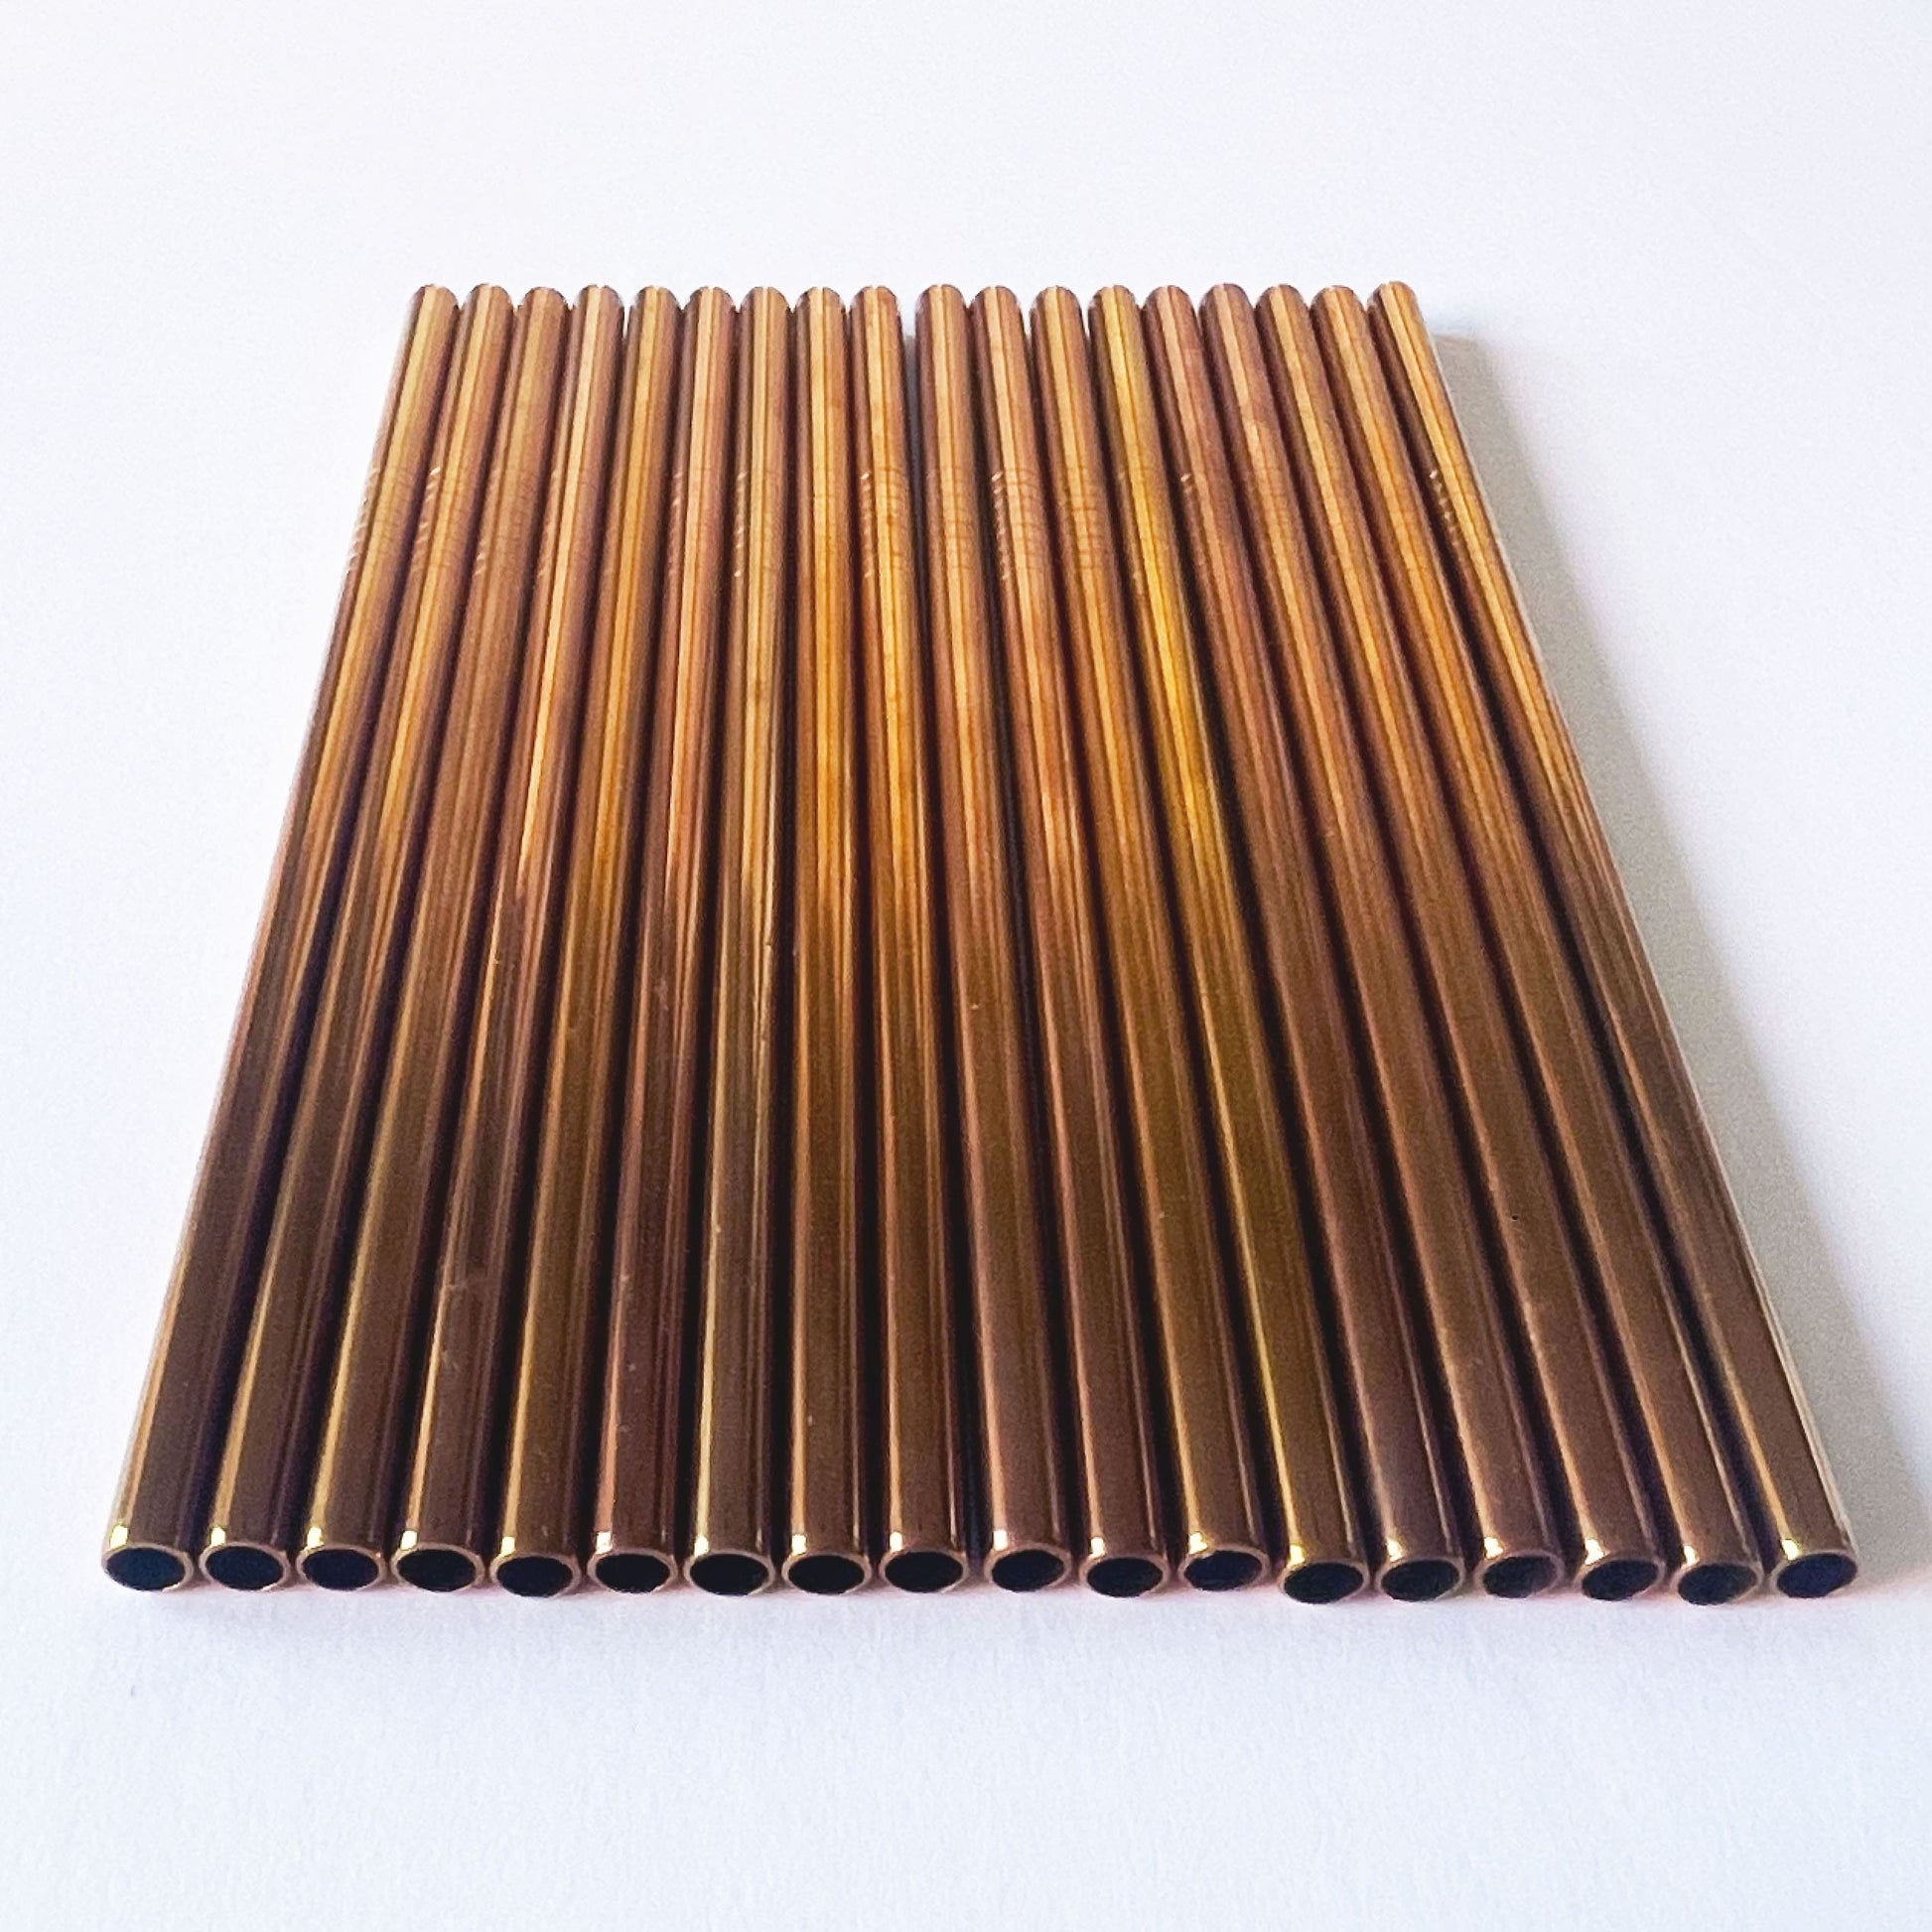 Collection of rose gold metal finish stainless steel straws and cleaner. 8mm wide, for smoothies